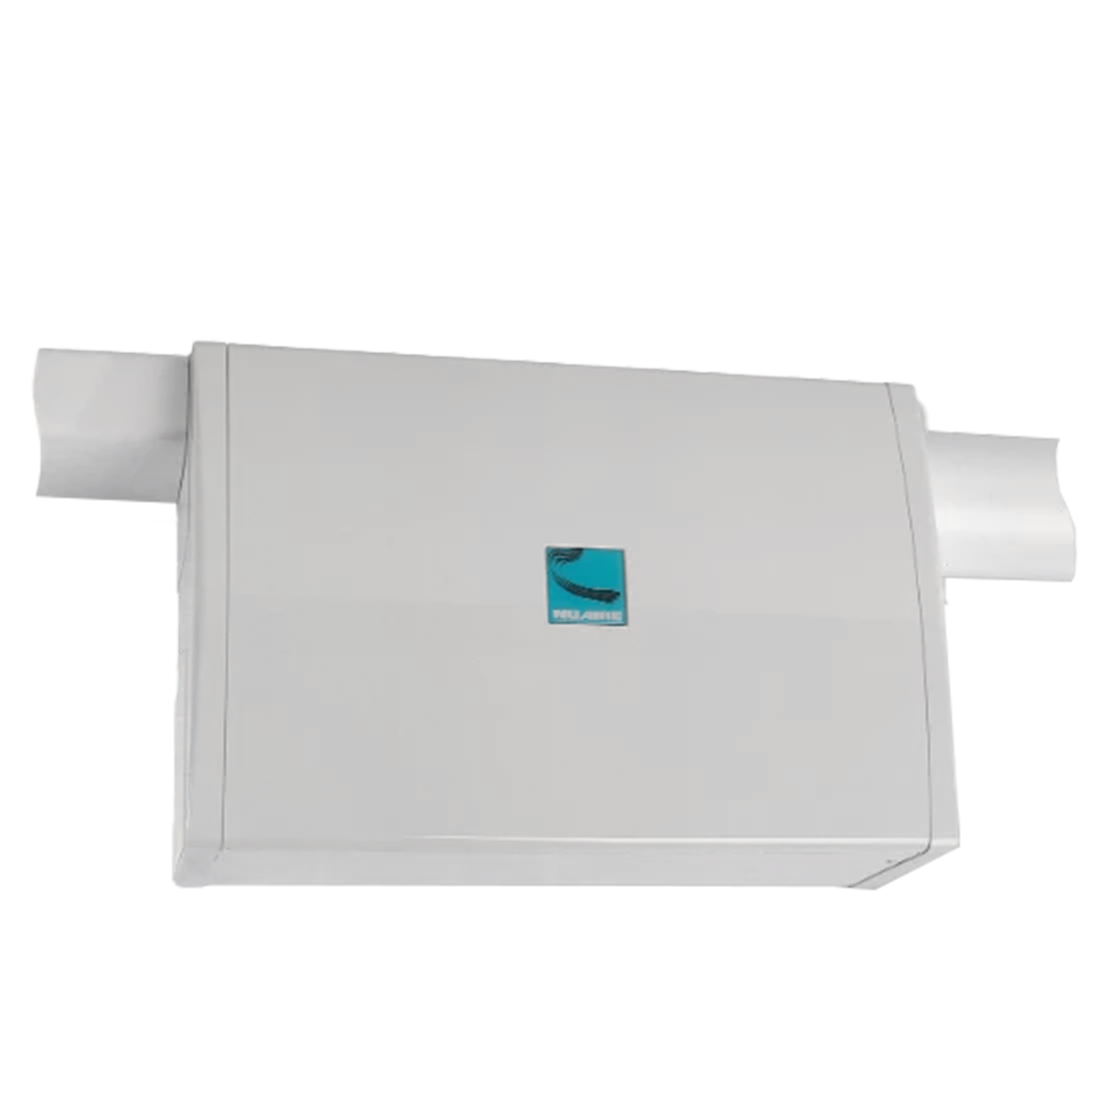 Flat Master Wall Mounted Positive Input Ventilation System